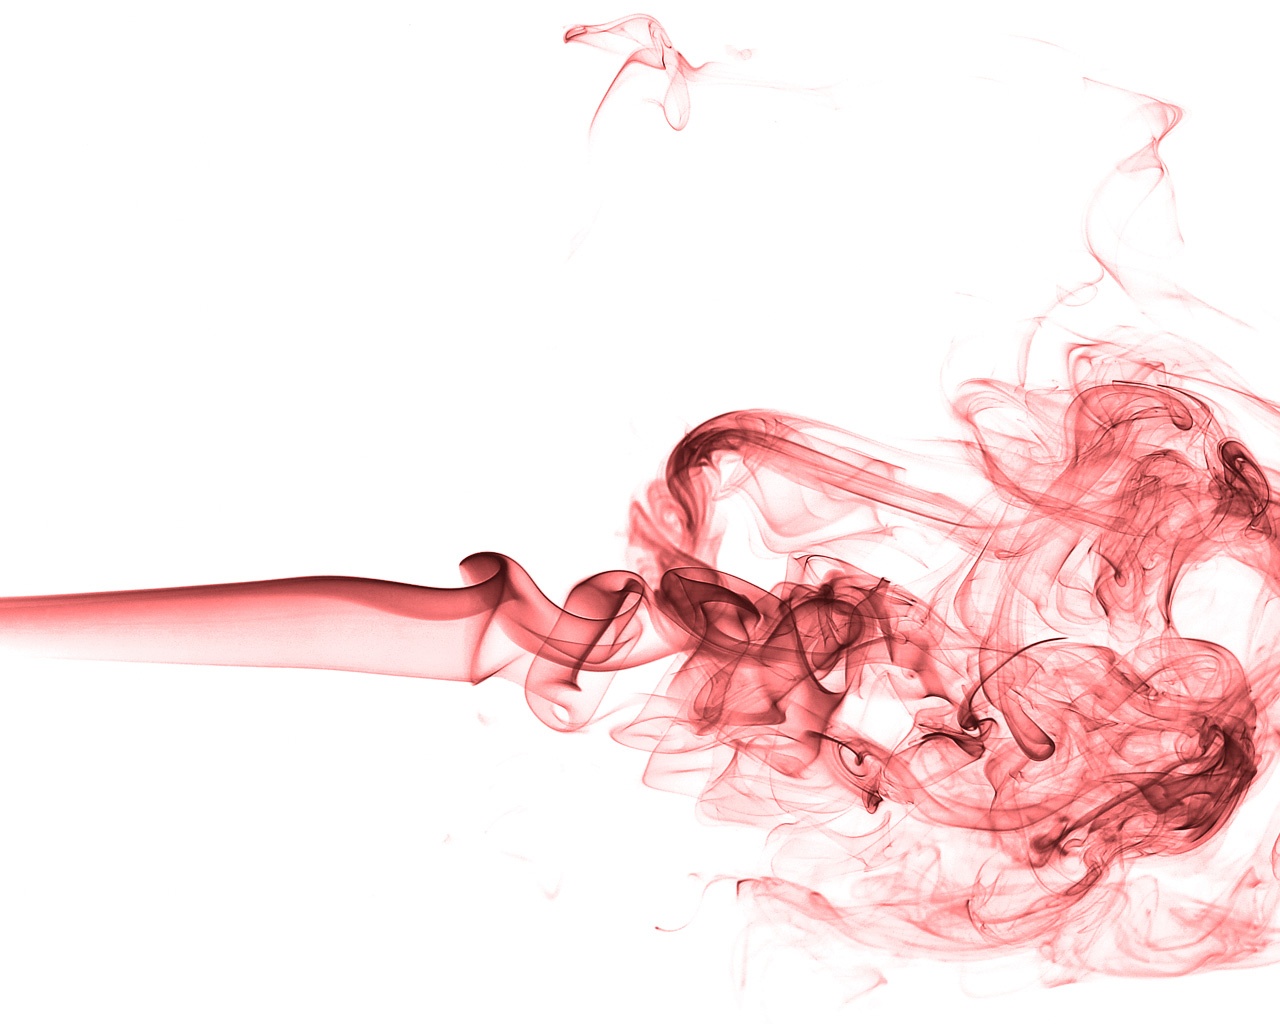 Best Abstract Wallpaper: Red Smoke 878734 Abstract